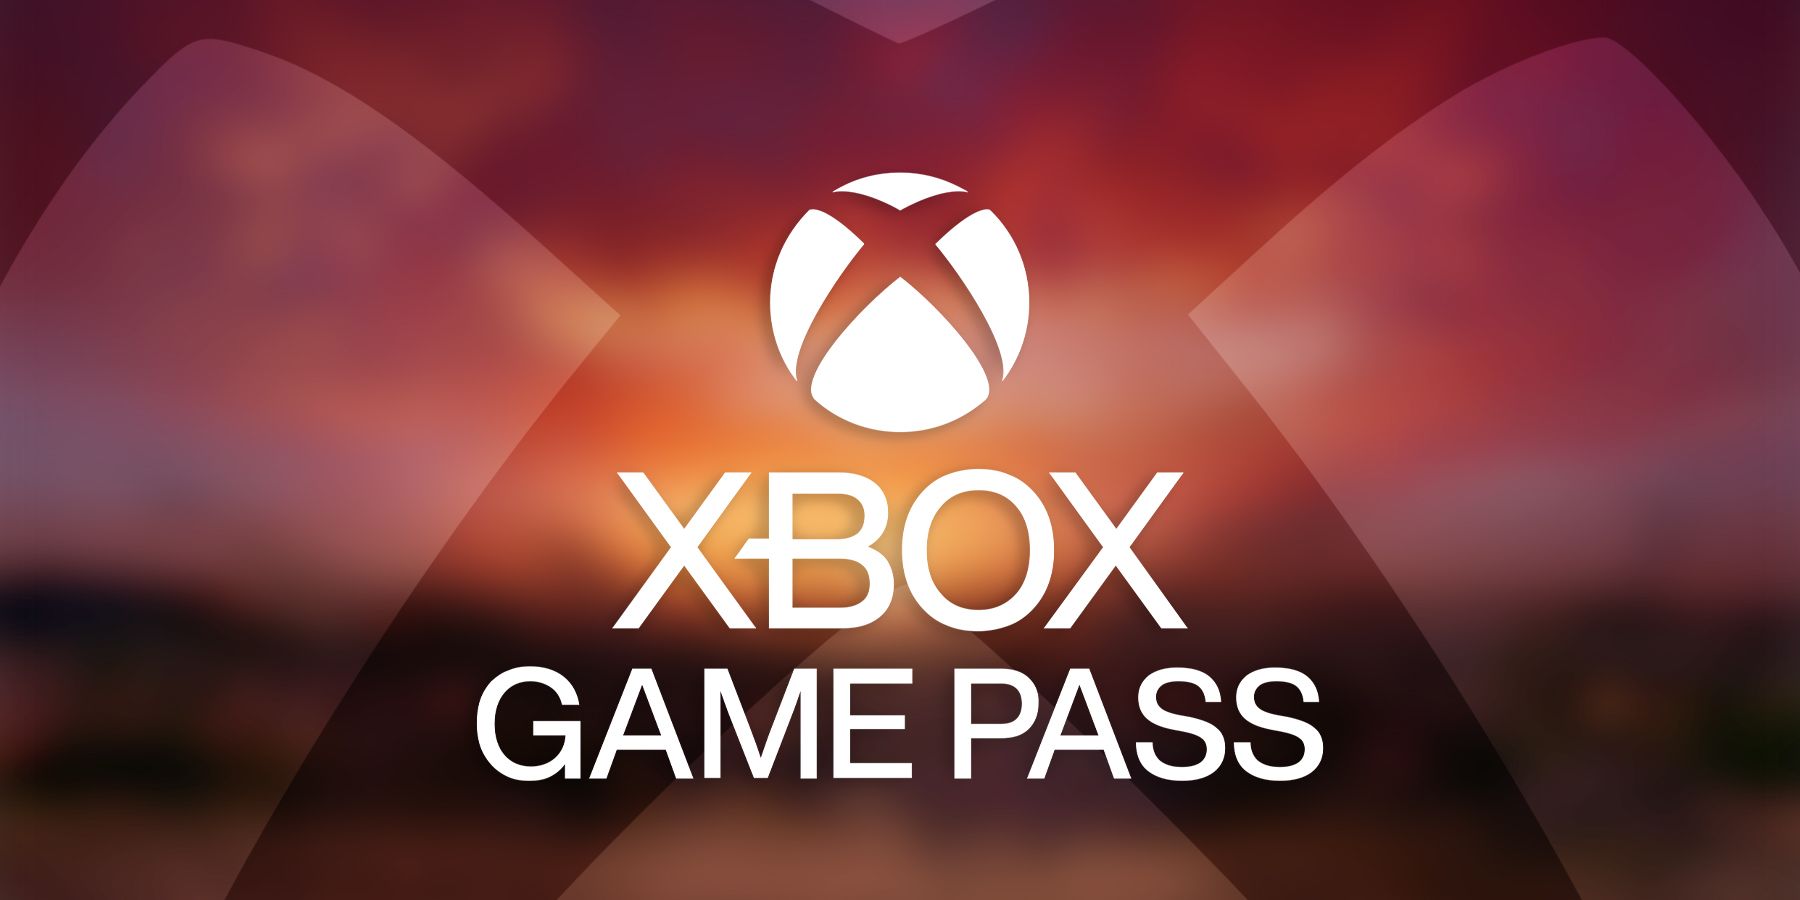 xbox game pass logo over blurred dead rising 2